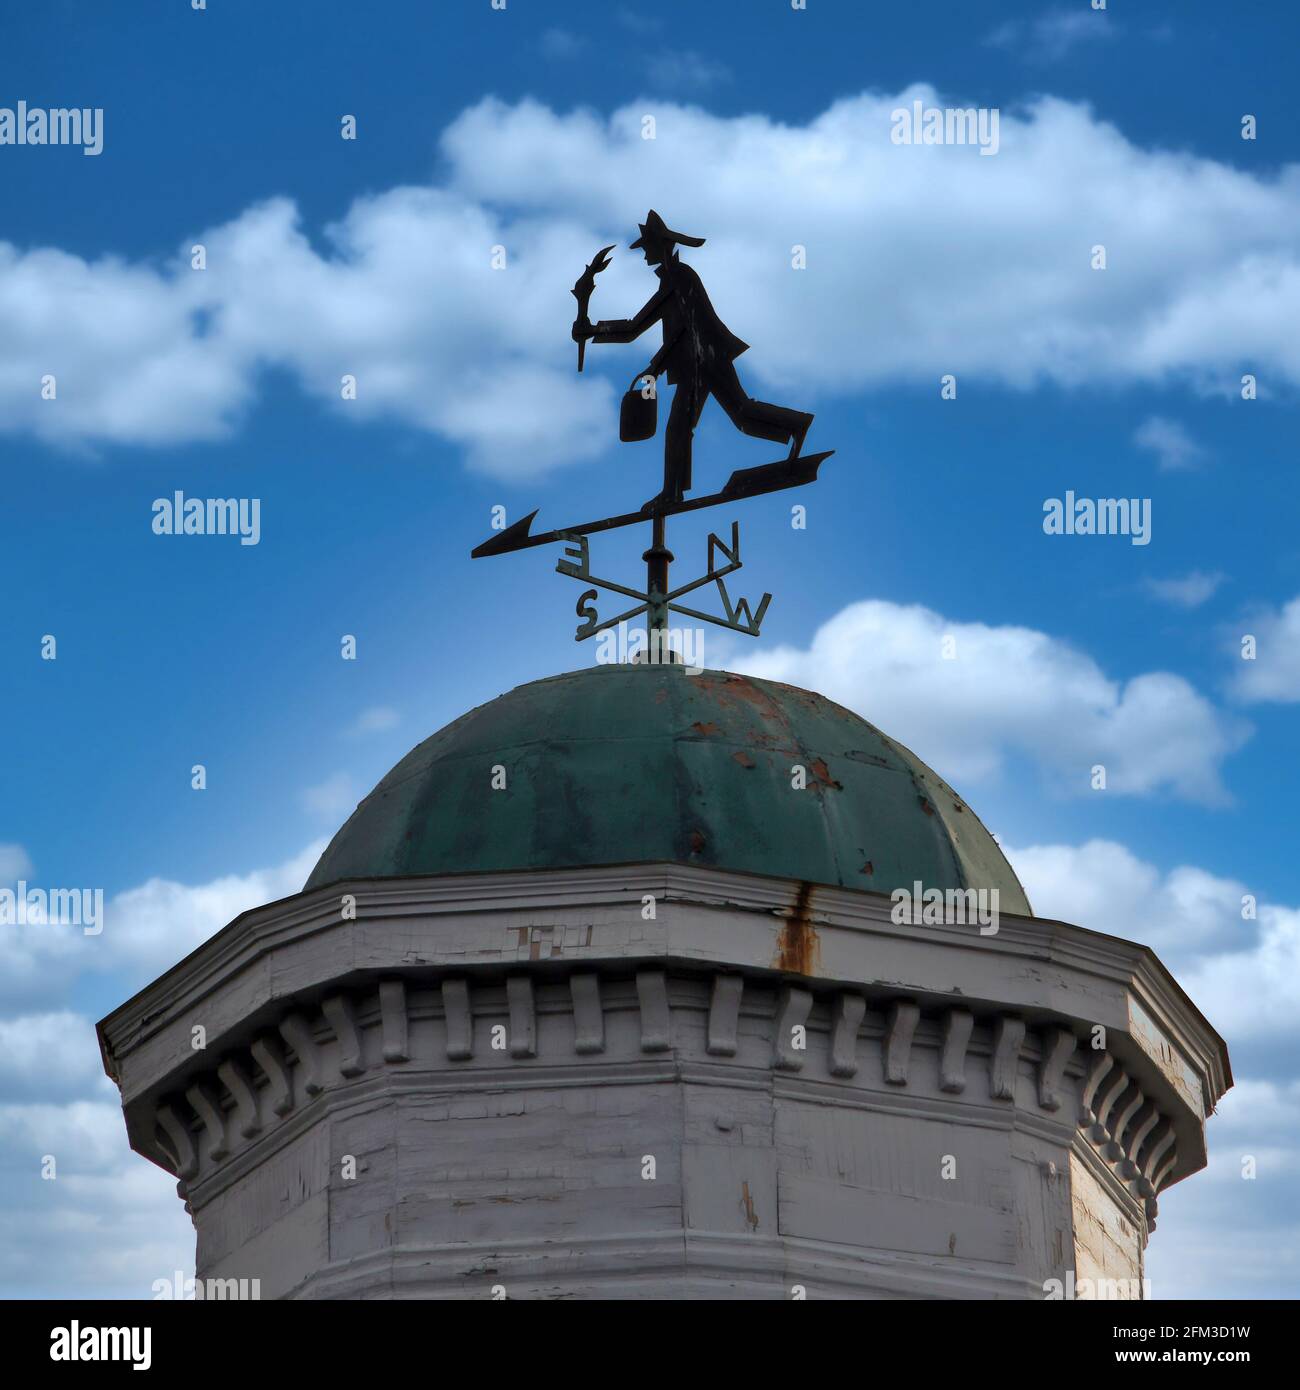 A fire fighter themed weather vane on a domed cupola of a building. Stock Photo